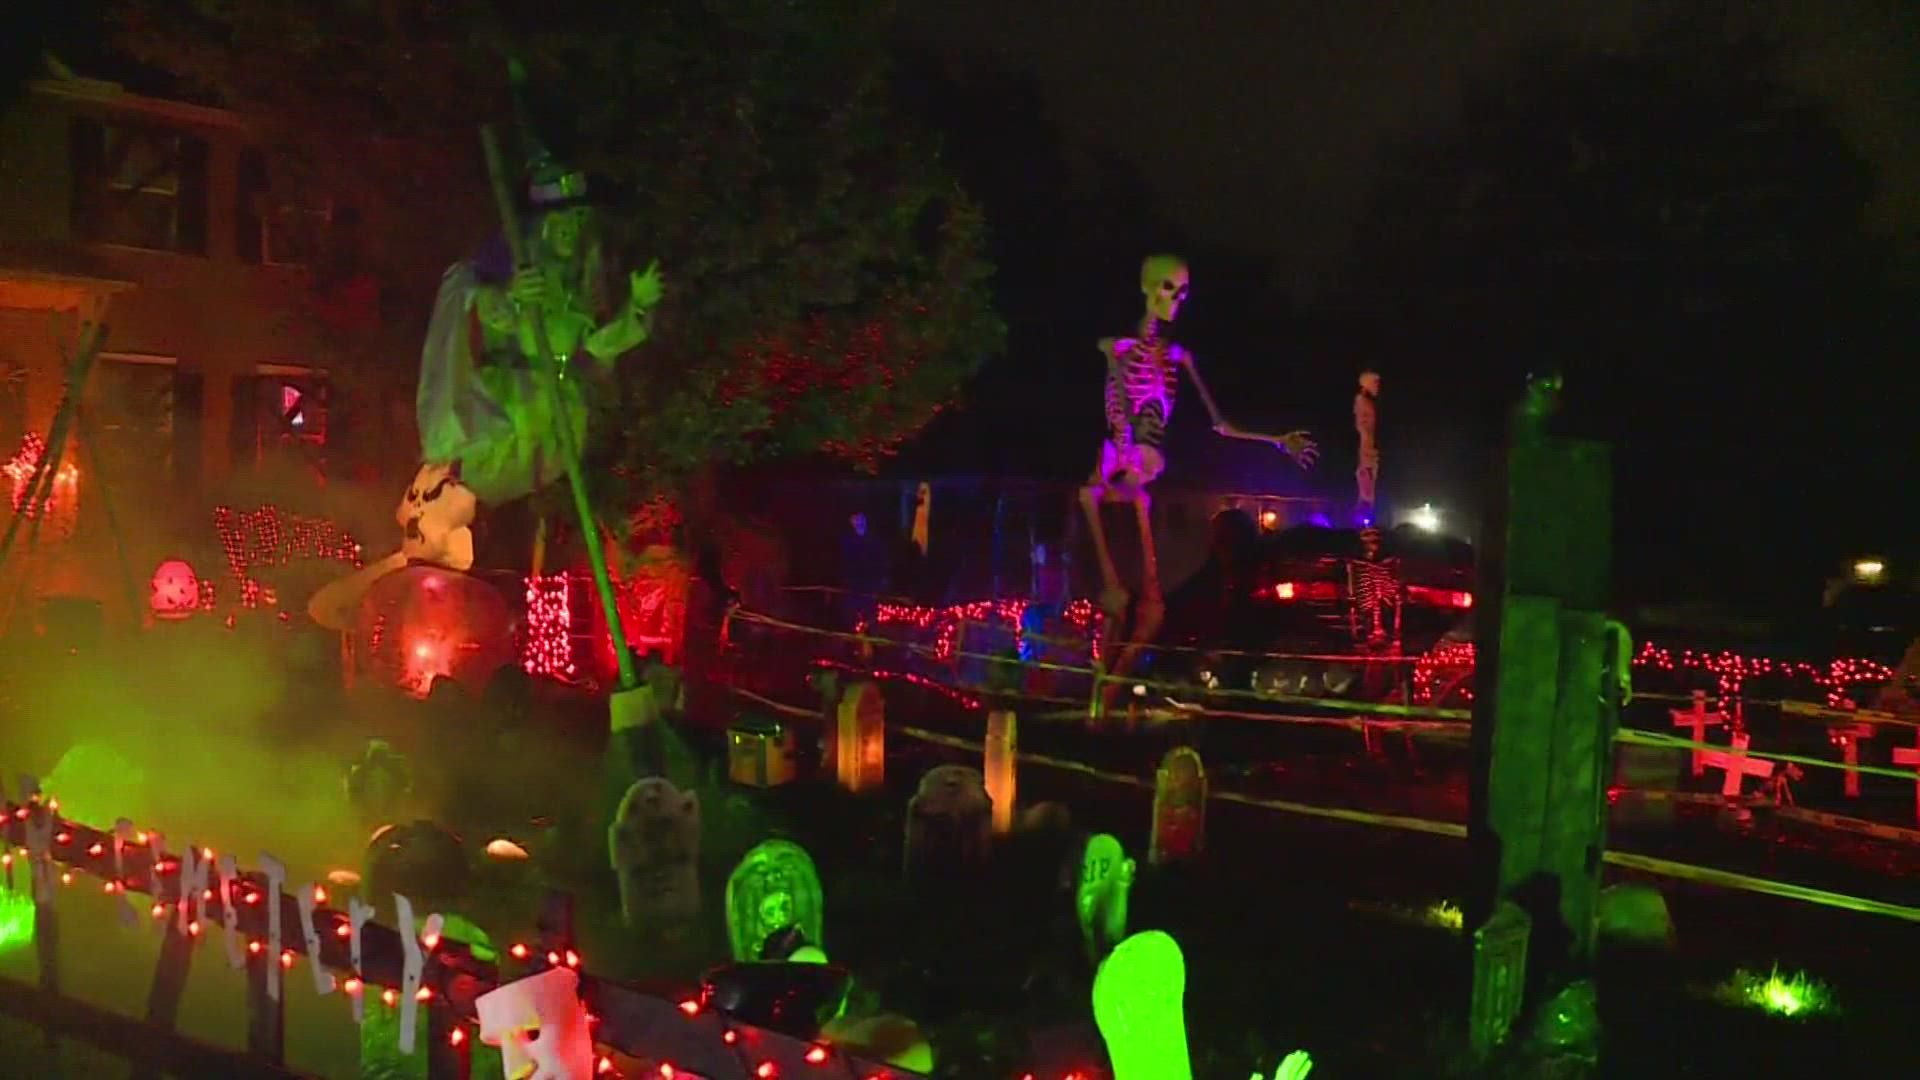 A 14-year-old boy is the brains behind this epic Halloween display in the 400 block of Knollwood Avenue in Tallmadge.